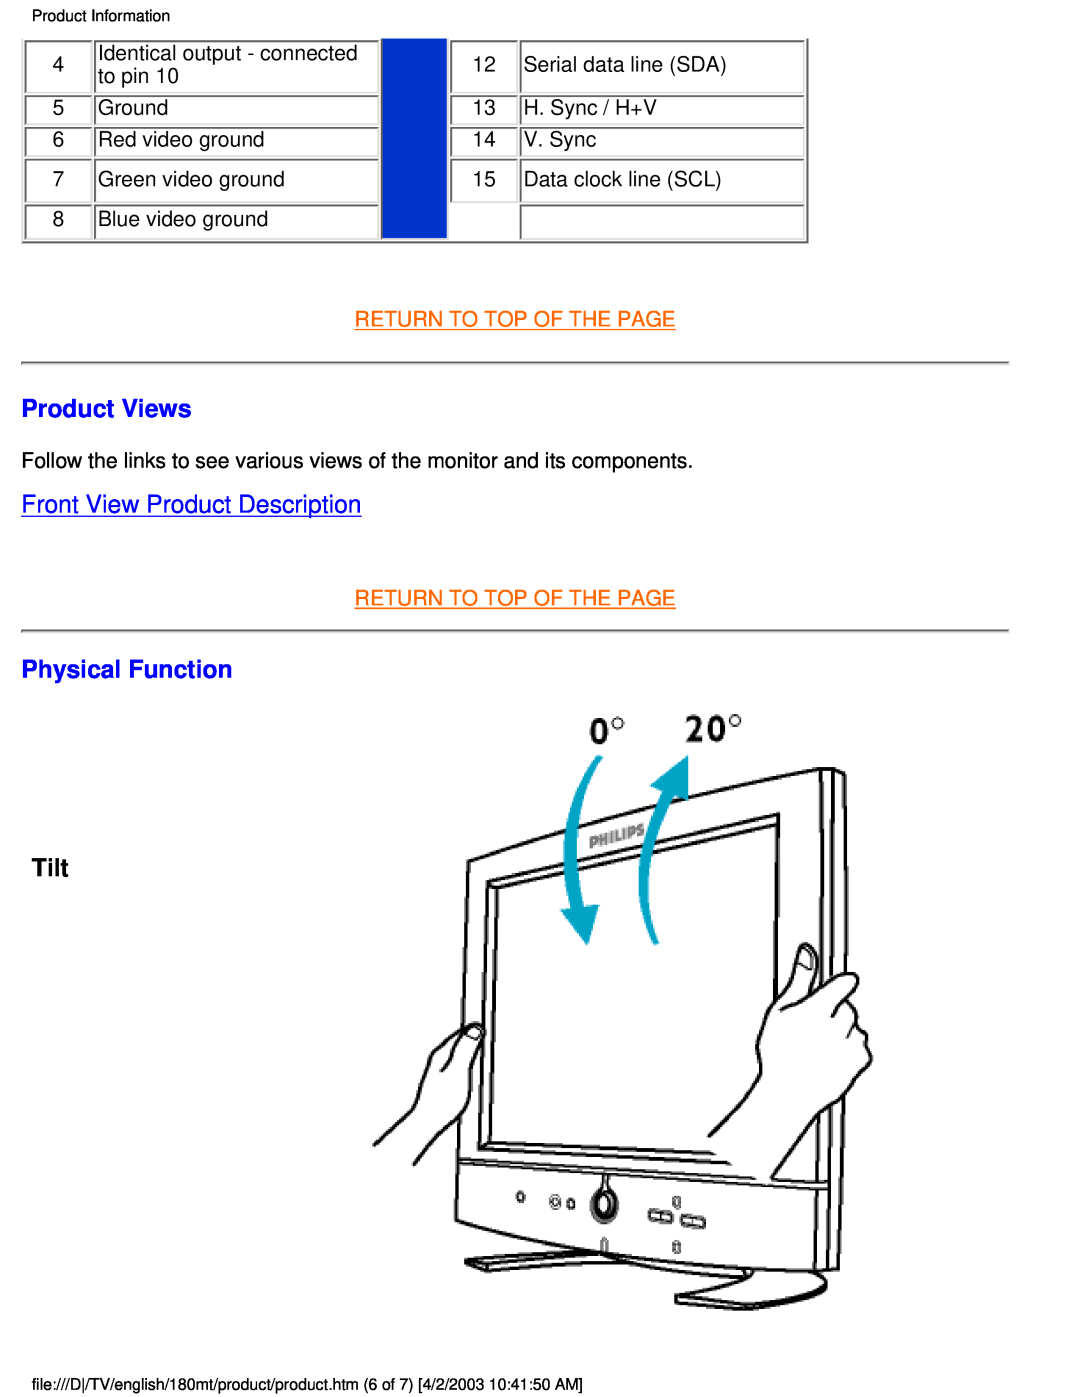 Philips 180MT manual Product Views, Front View Product Description, Physical Function, Tilt, Return To Top Of The Page 